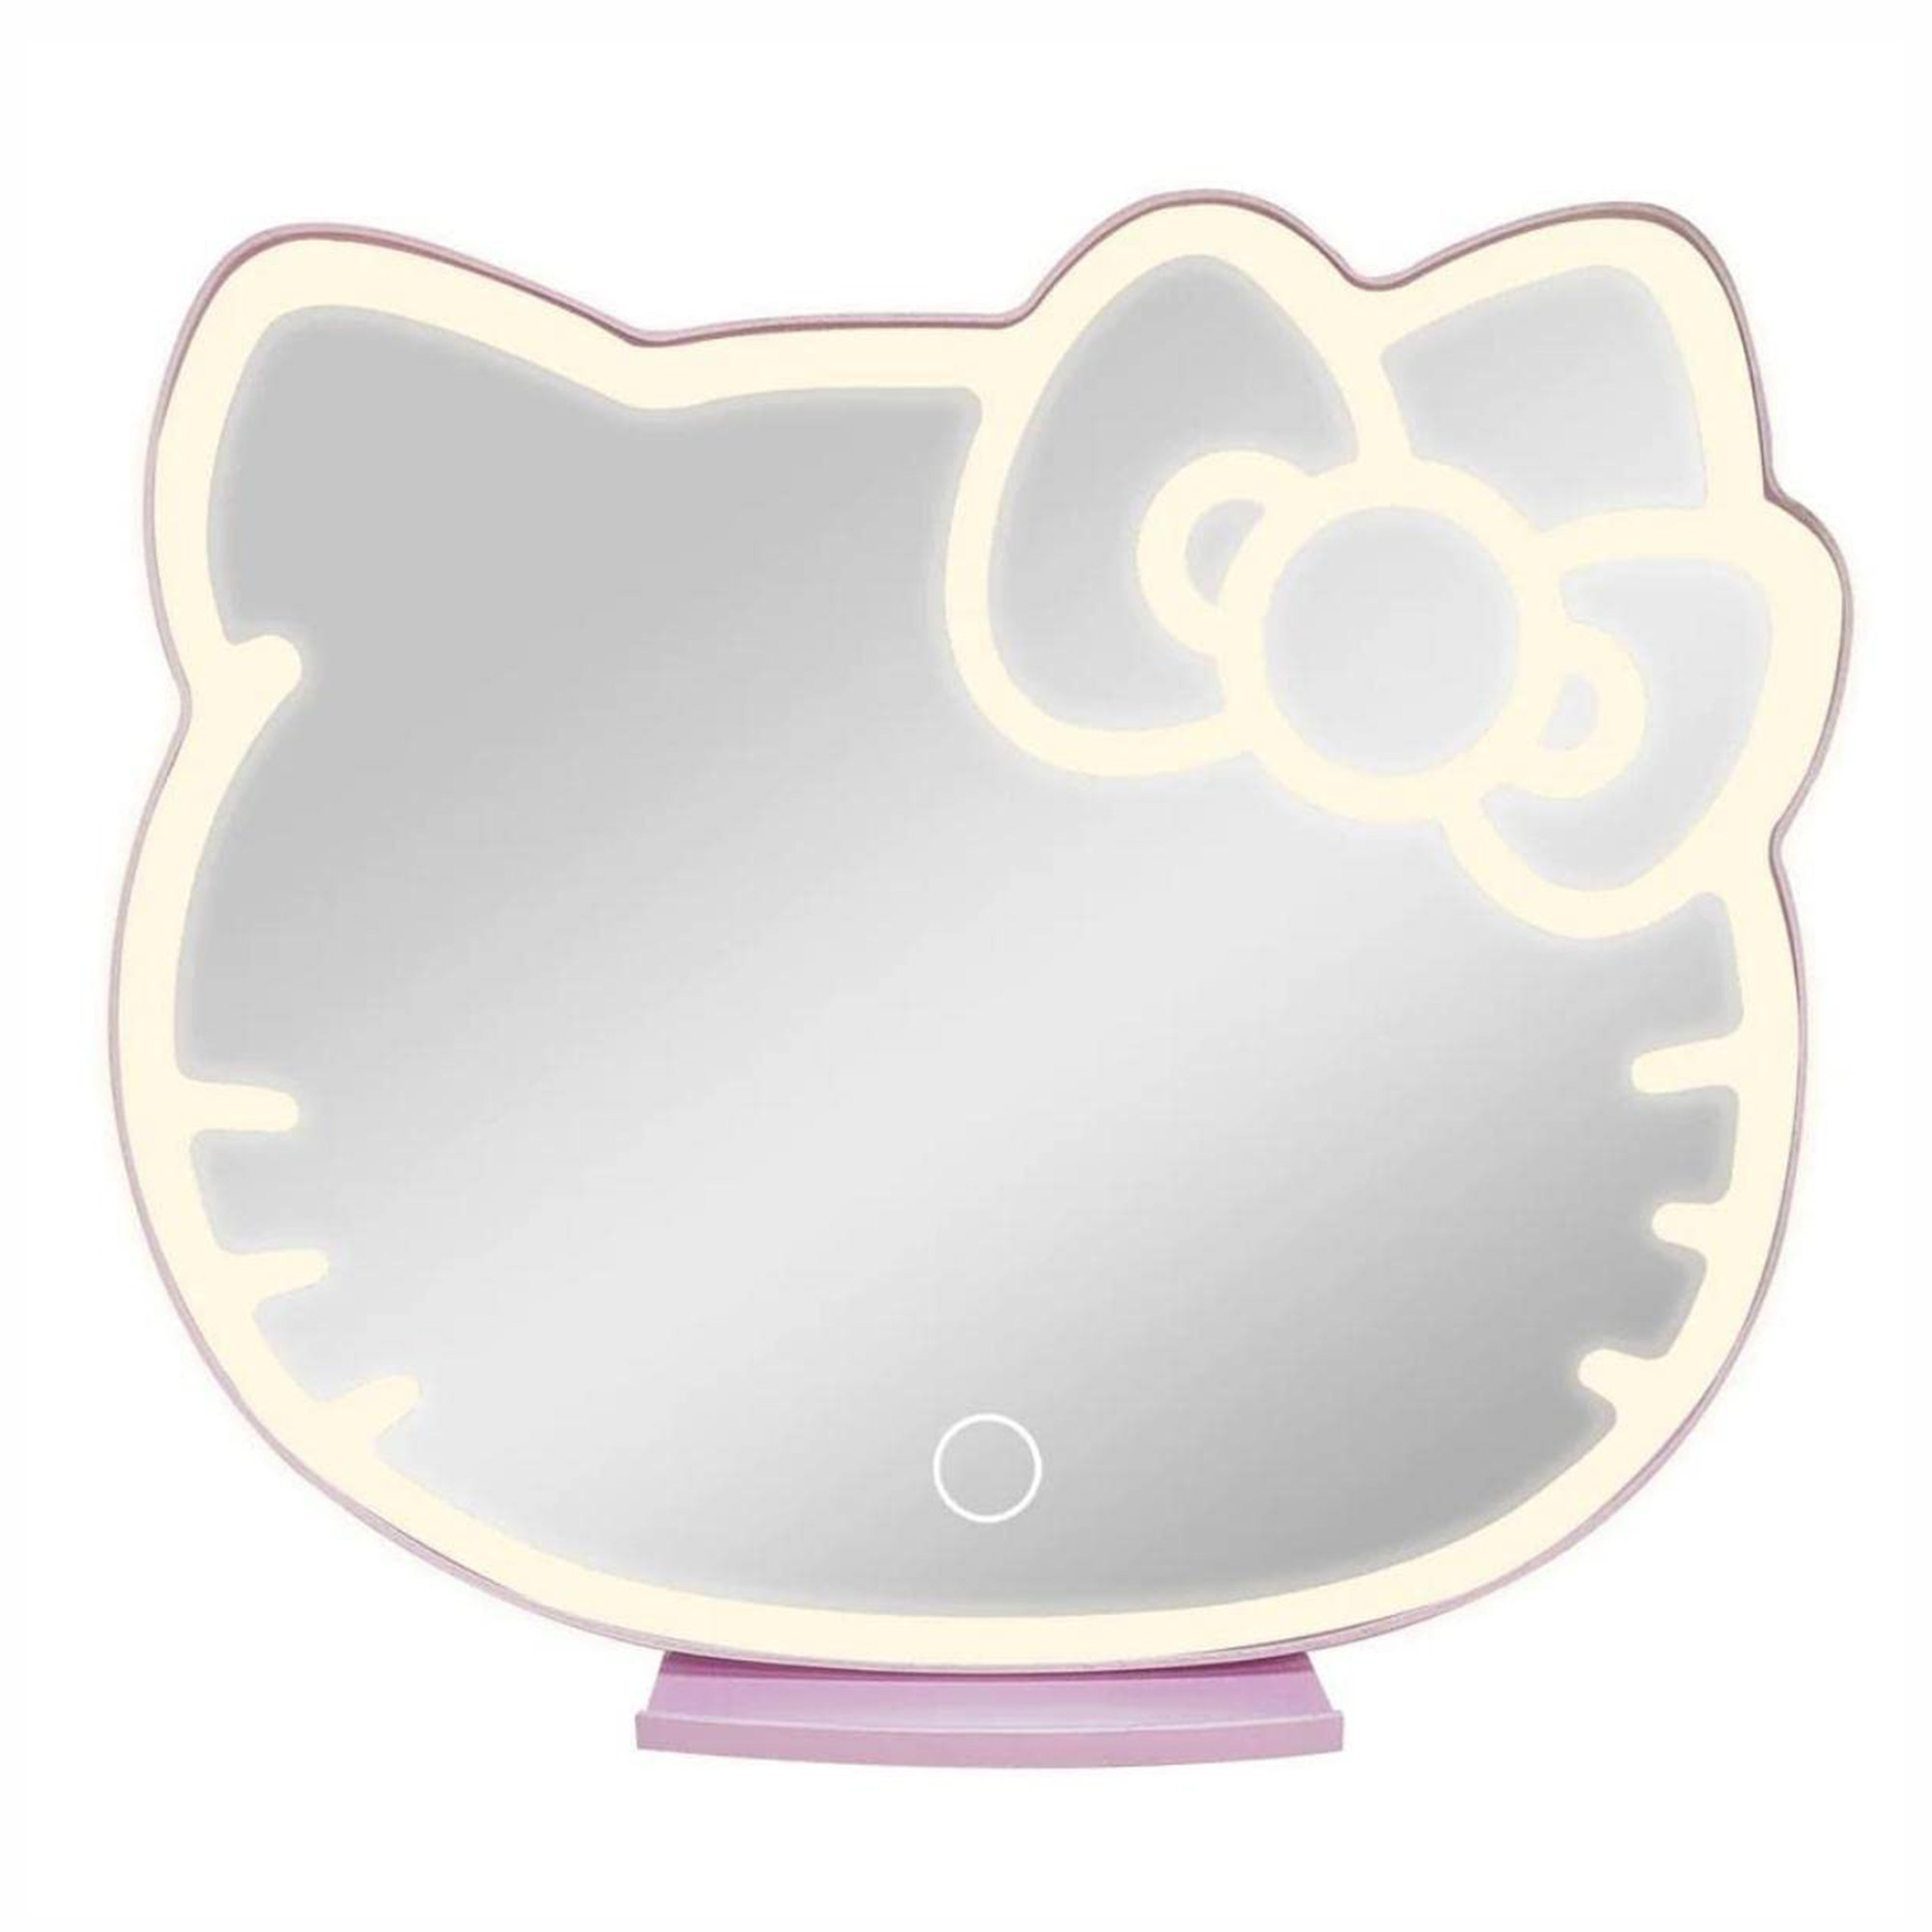 Shop Hello Kitty Wall Hanging Decor online